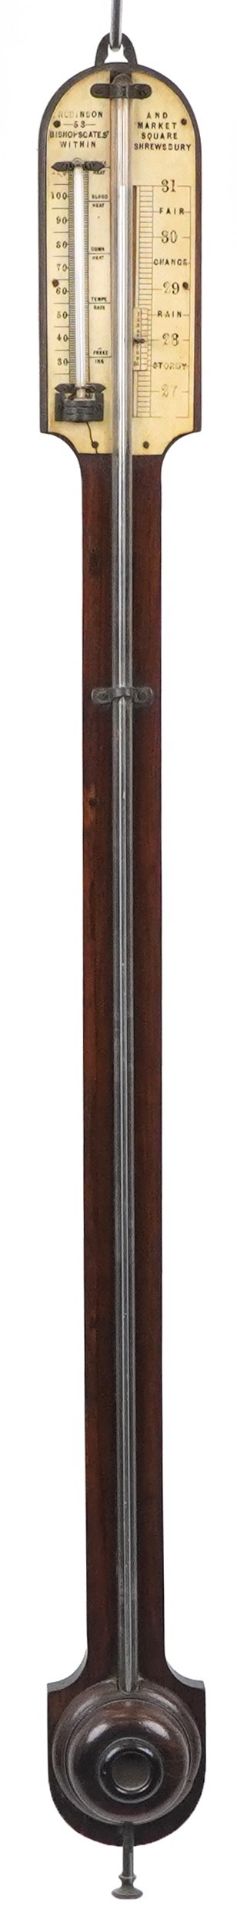 Robinson, 19th century rosewood stick barometer, 92cm high : For further information on this lot